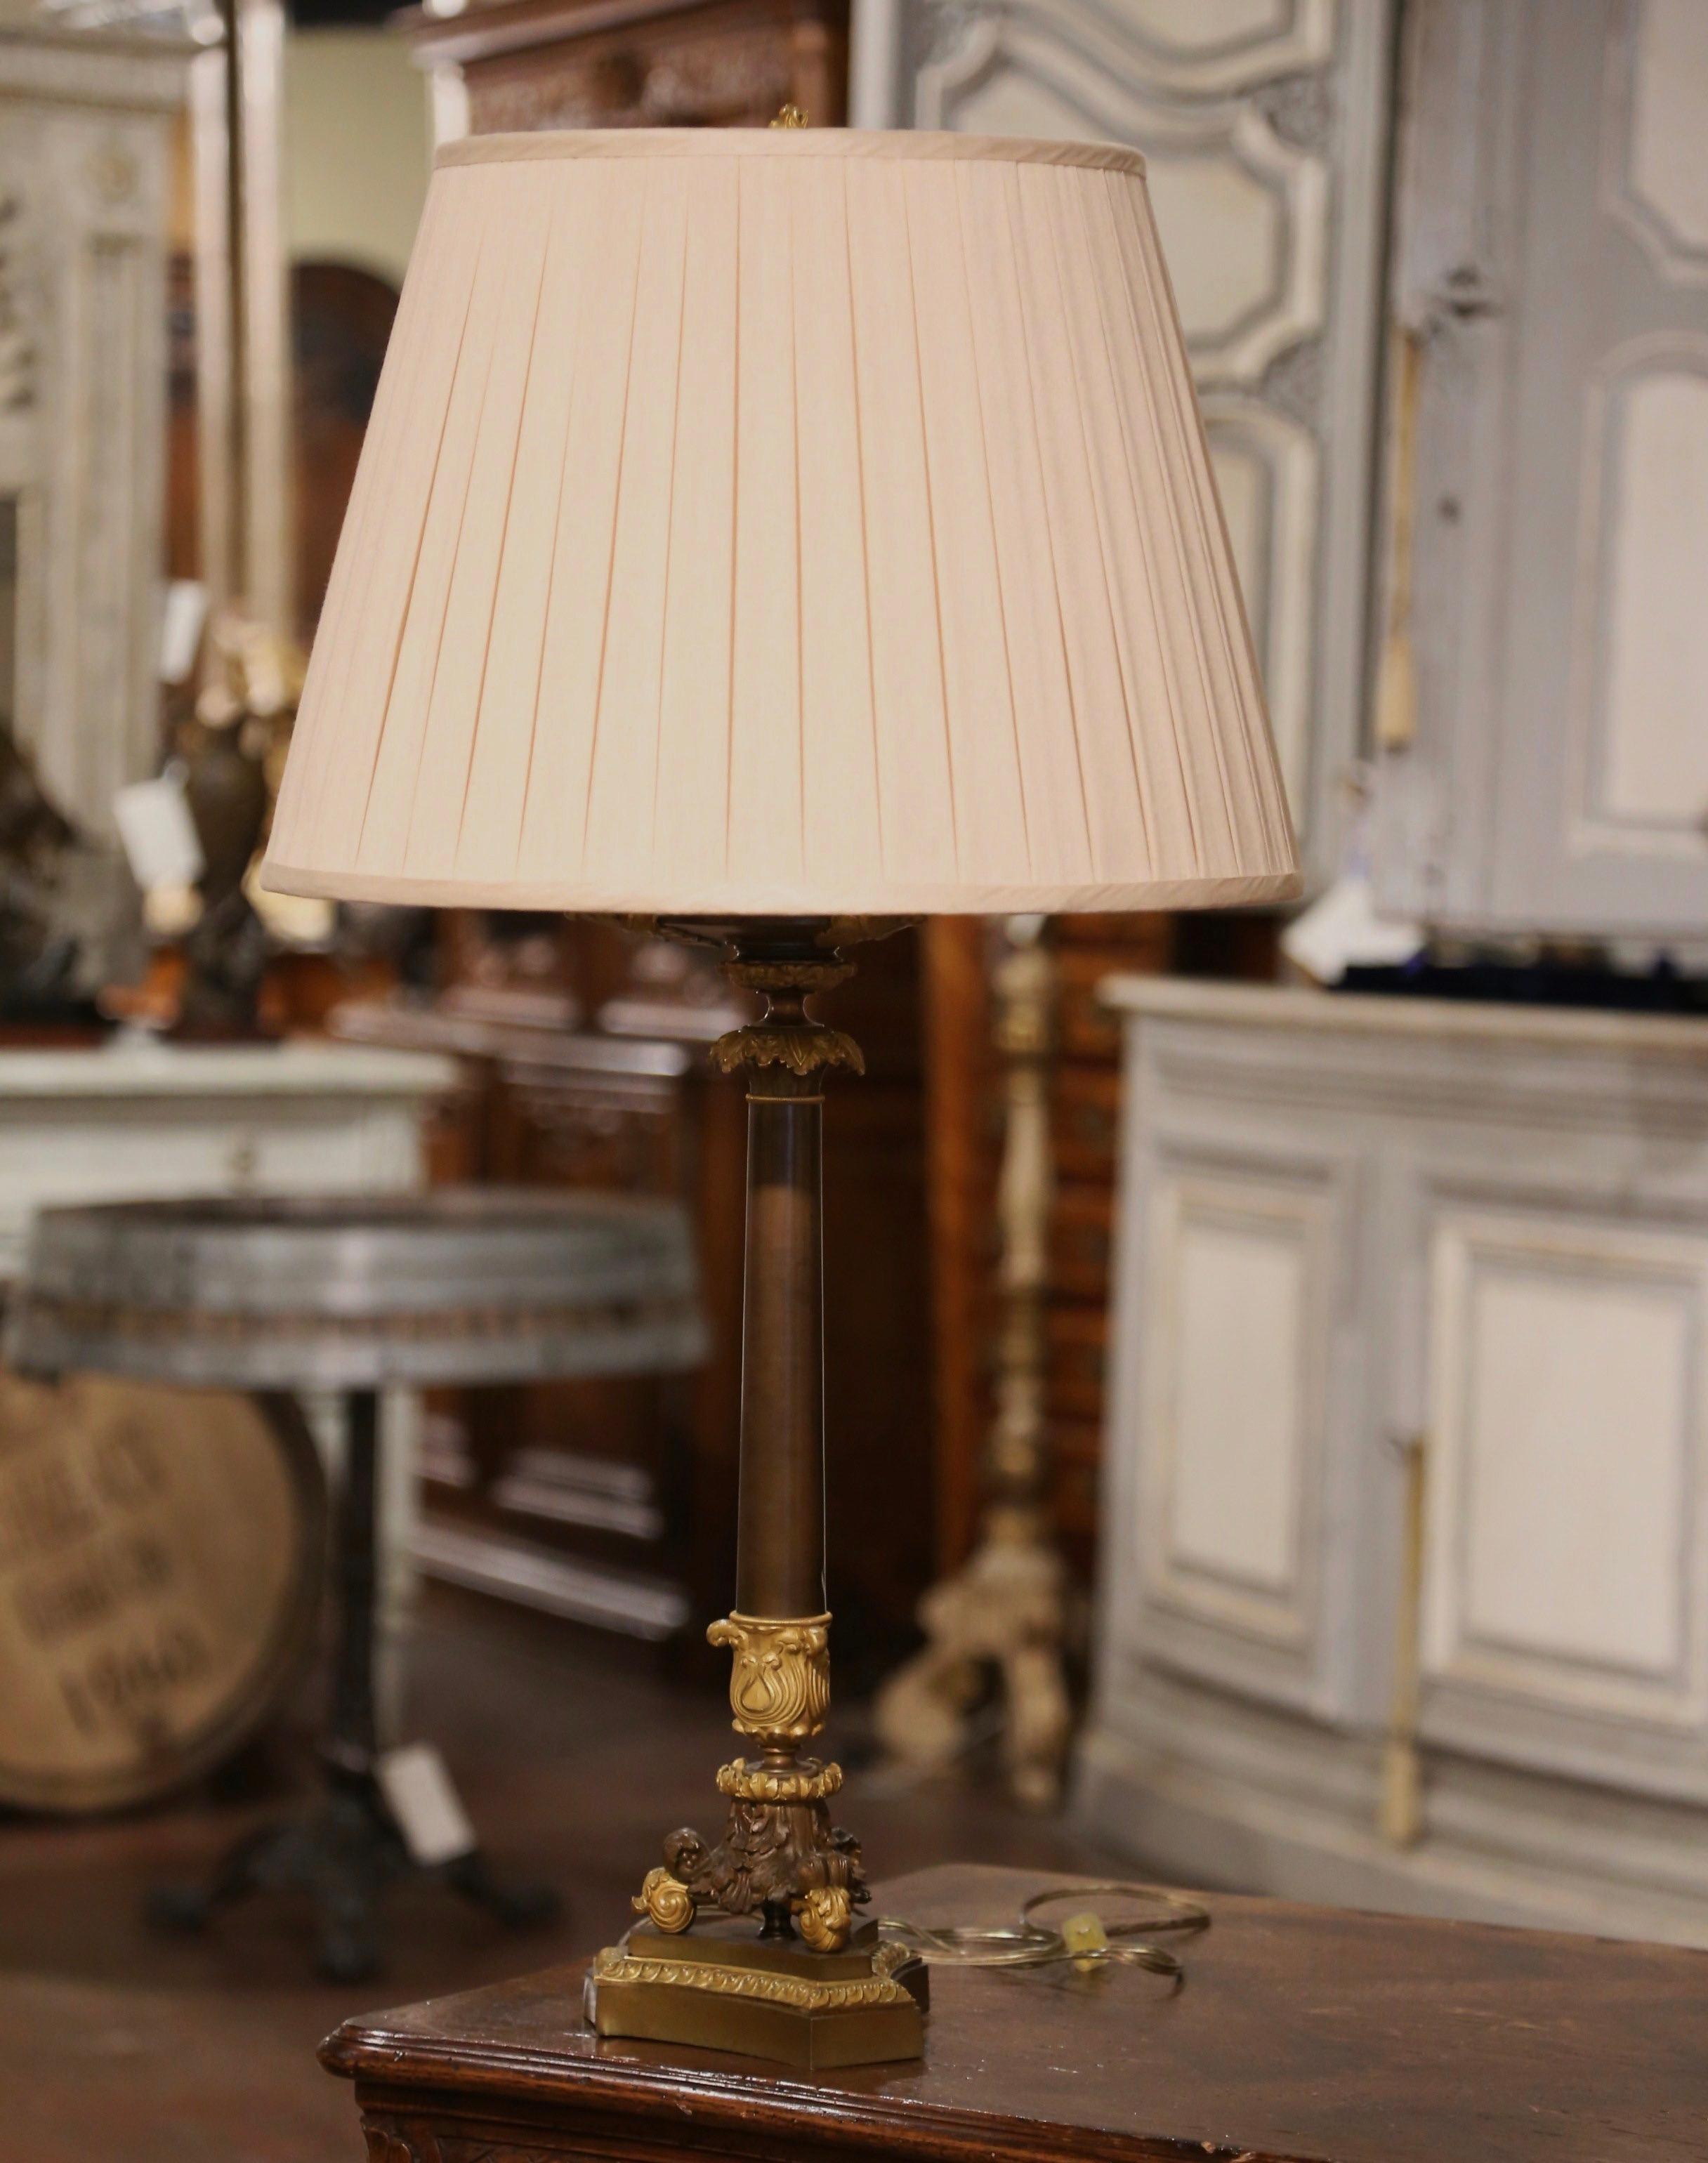 19th Century French Empire Bronze Dore Two-Light Candelabra Table Lamp For Sale 2